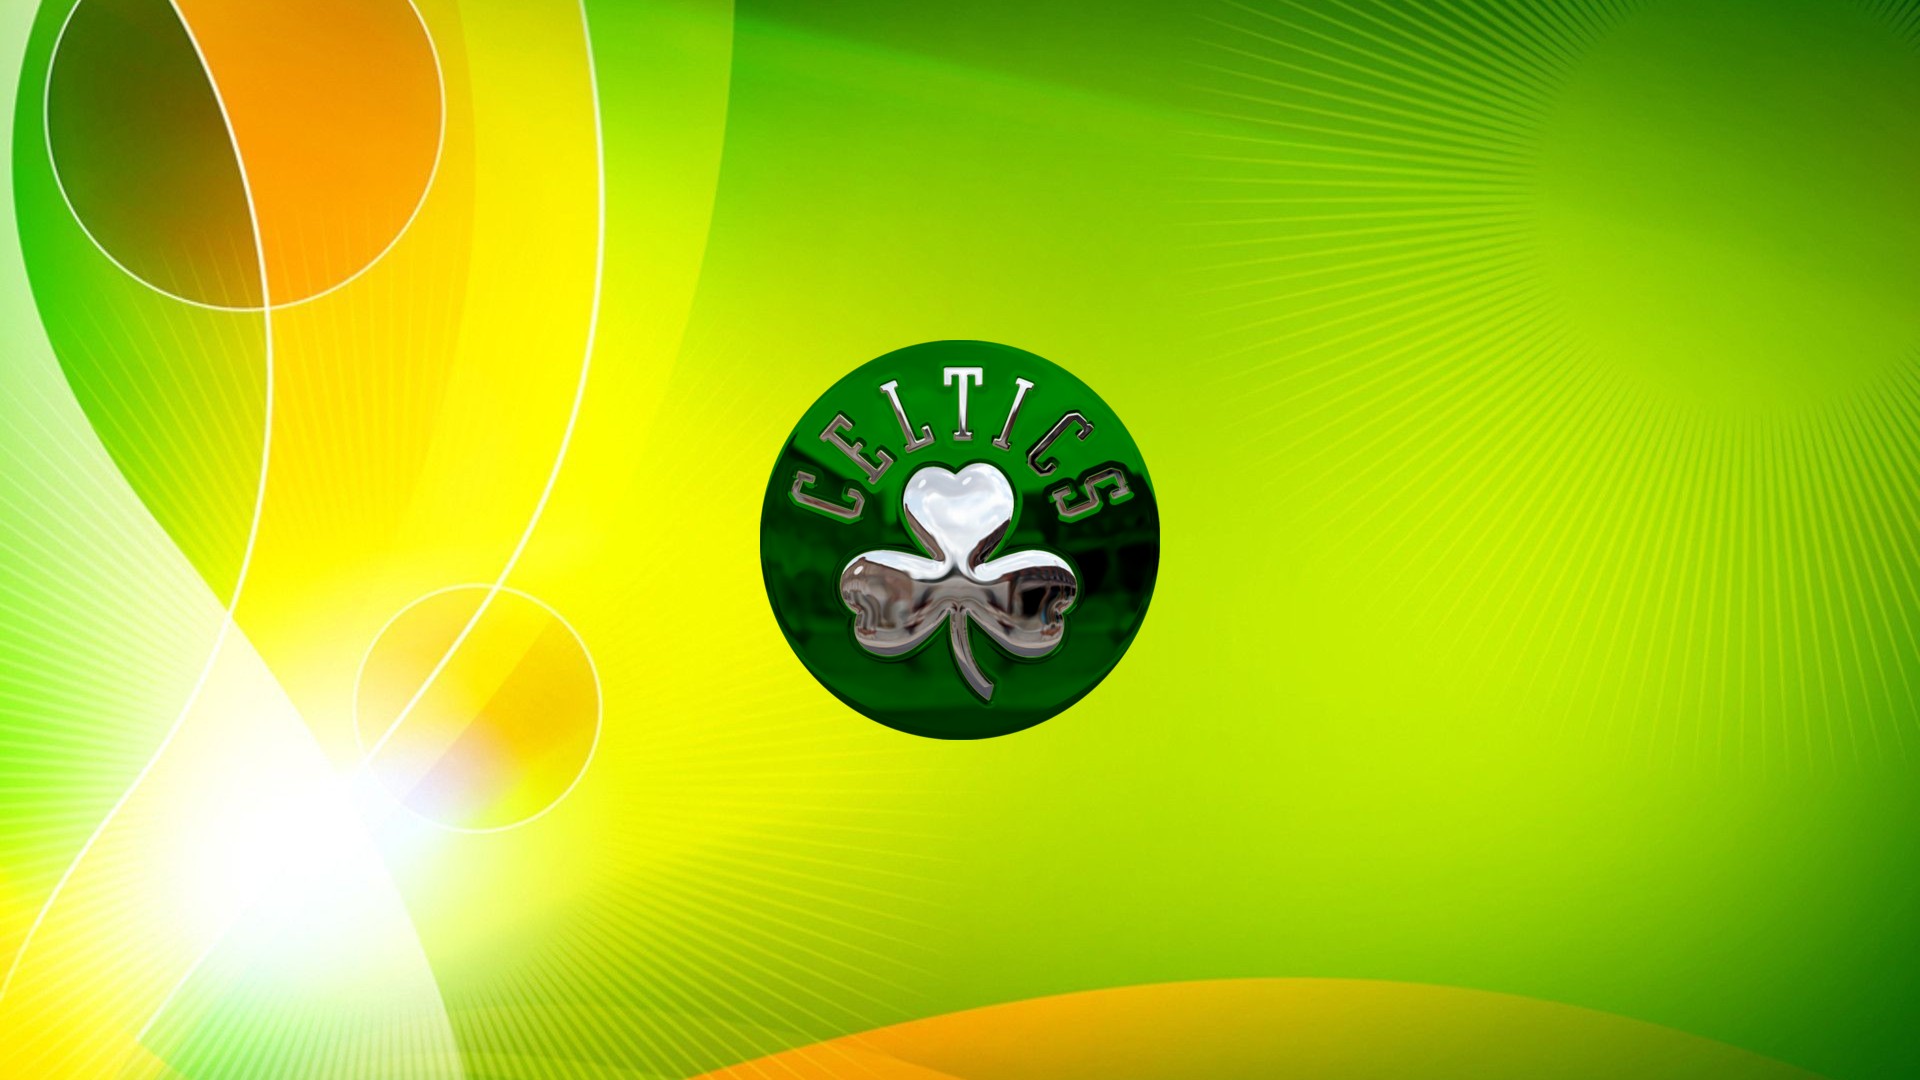 Boston Celtics Background Wallpaper HD With Resolution 1920X1080 pixel. You can make this wallpaper for your Desktop Computer Backgrounds, Mac Wallpapers, Android Lock screen or iPhone Screensavers